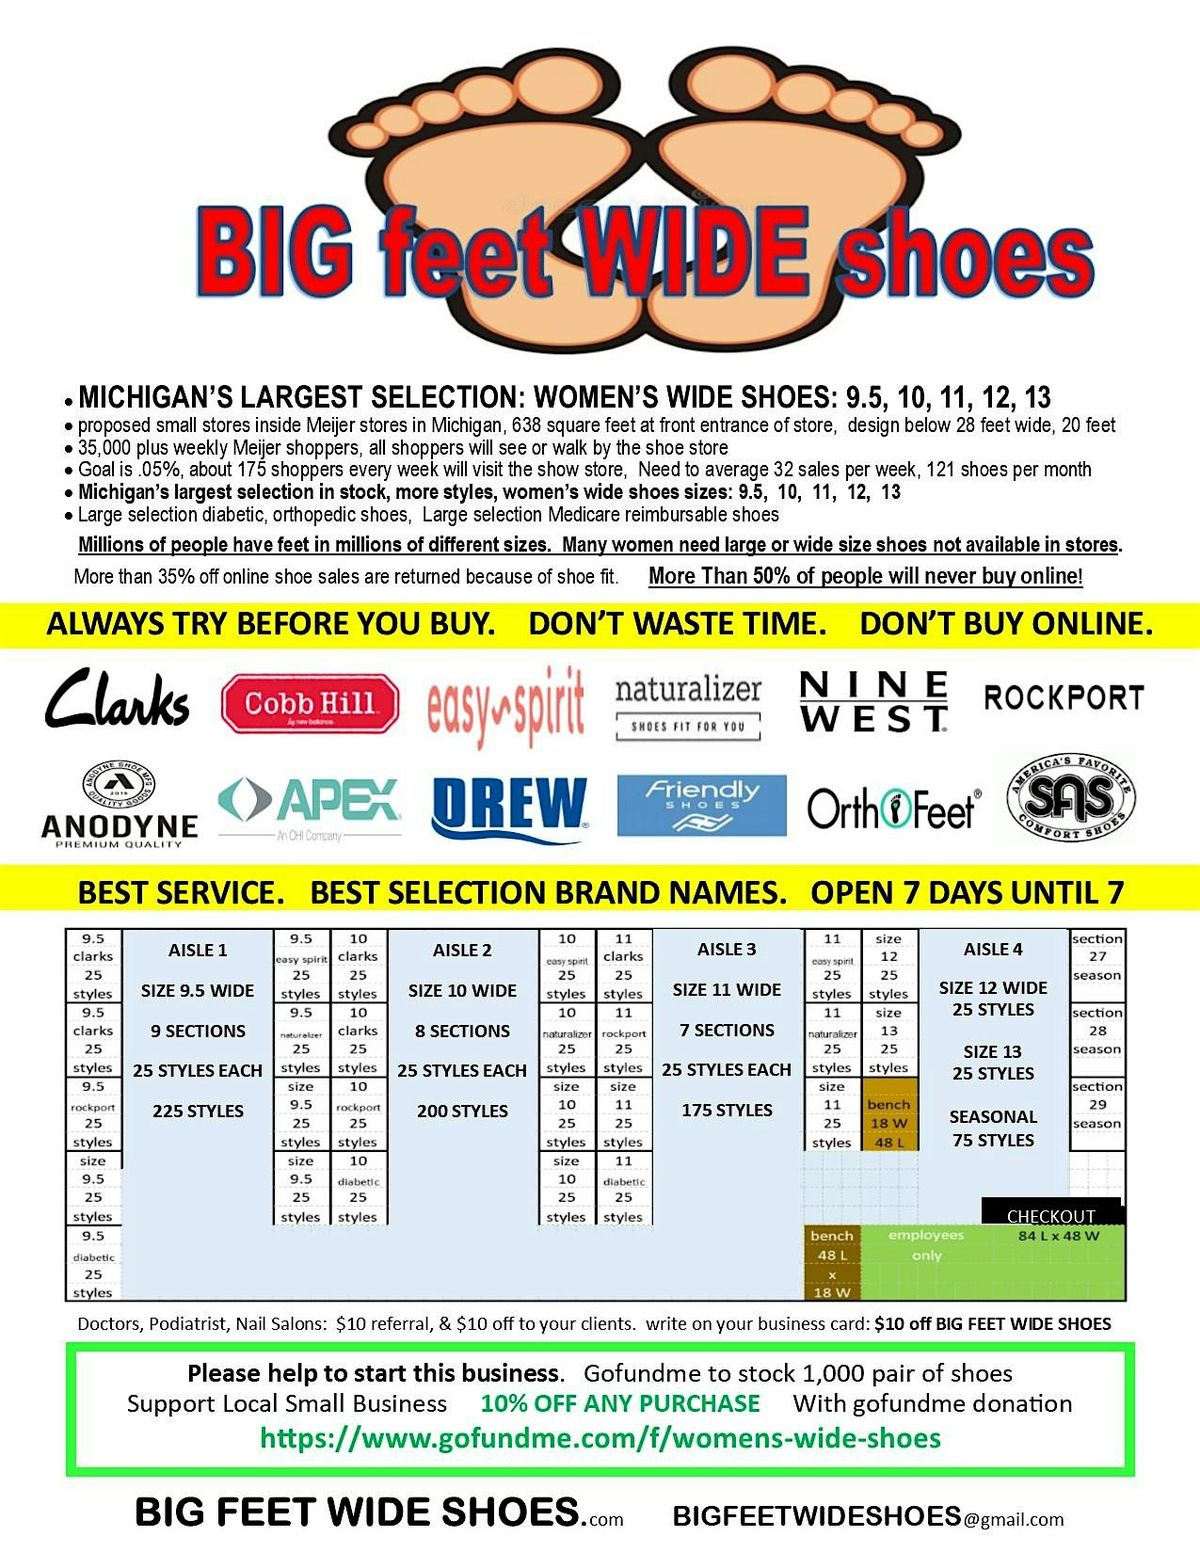 BIG FEET WIDE SHOES - Largest Selection In Michigan, Women's Wide Shoes: 9.5, 10, 11, 12, 13